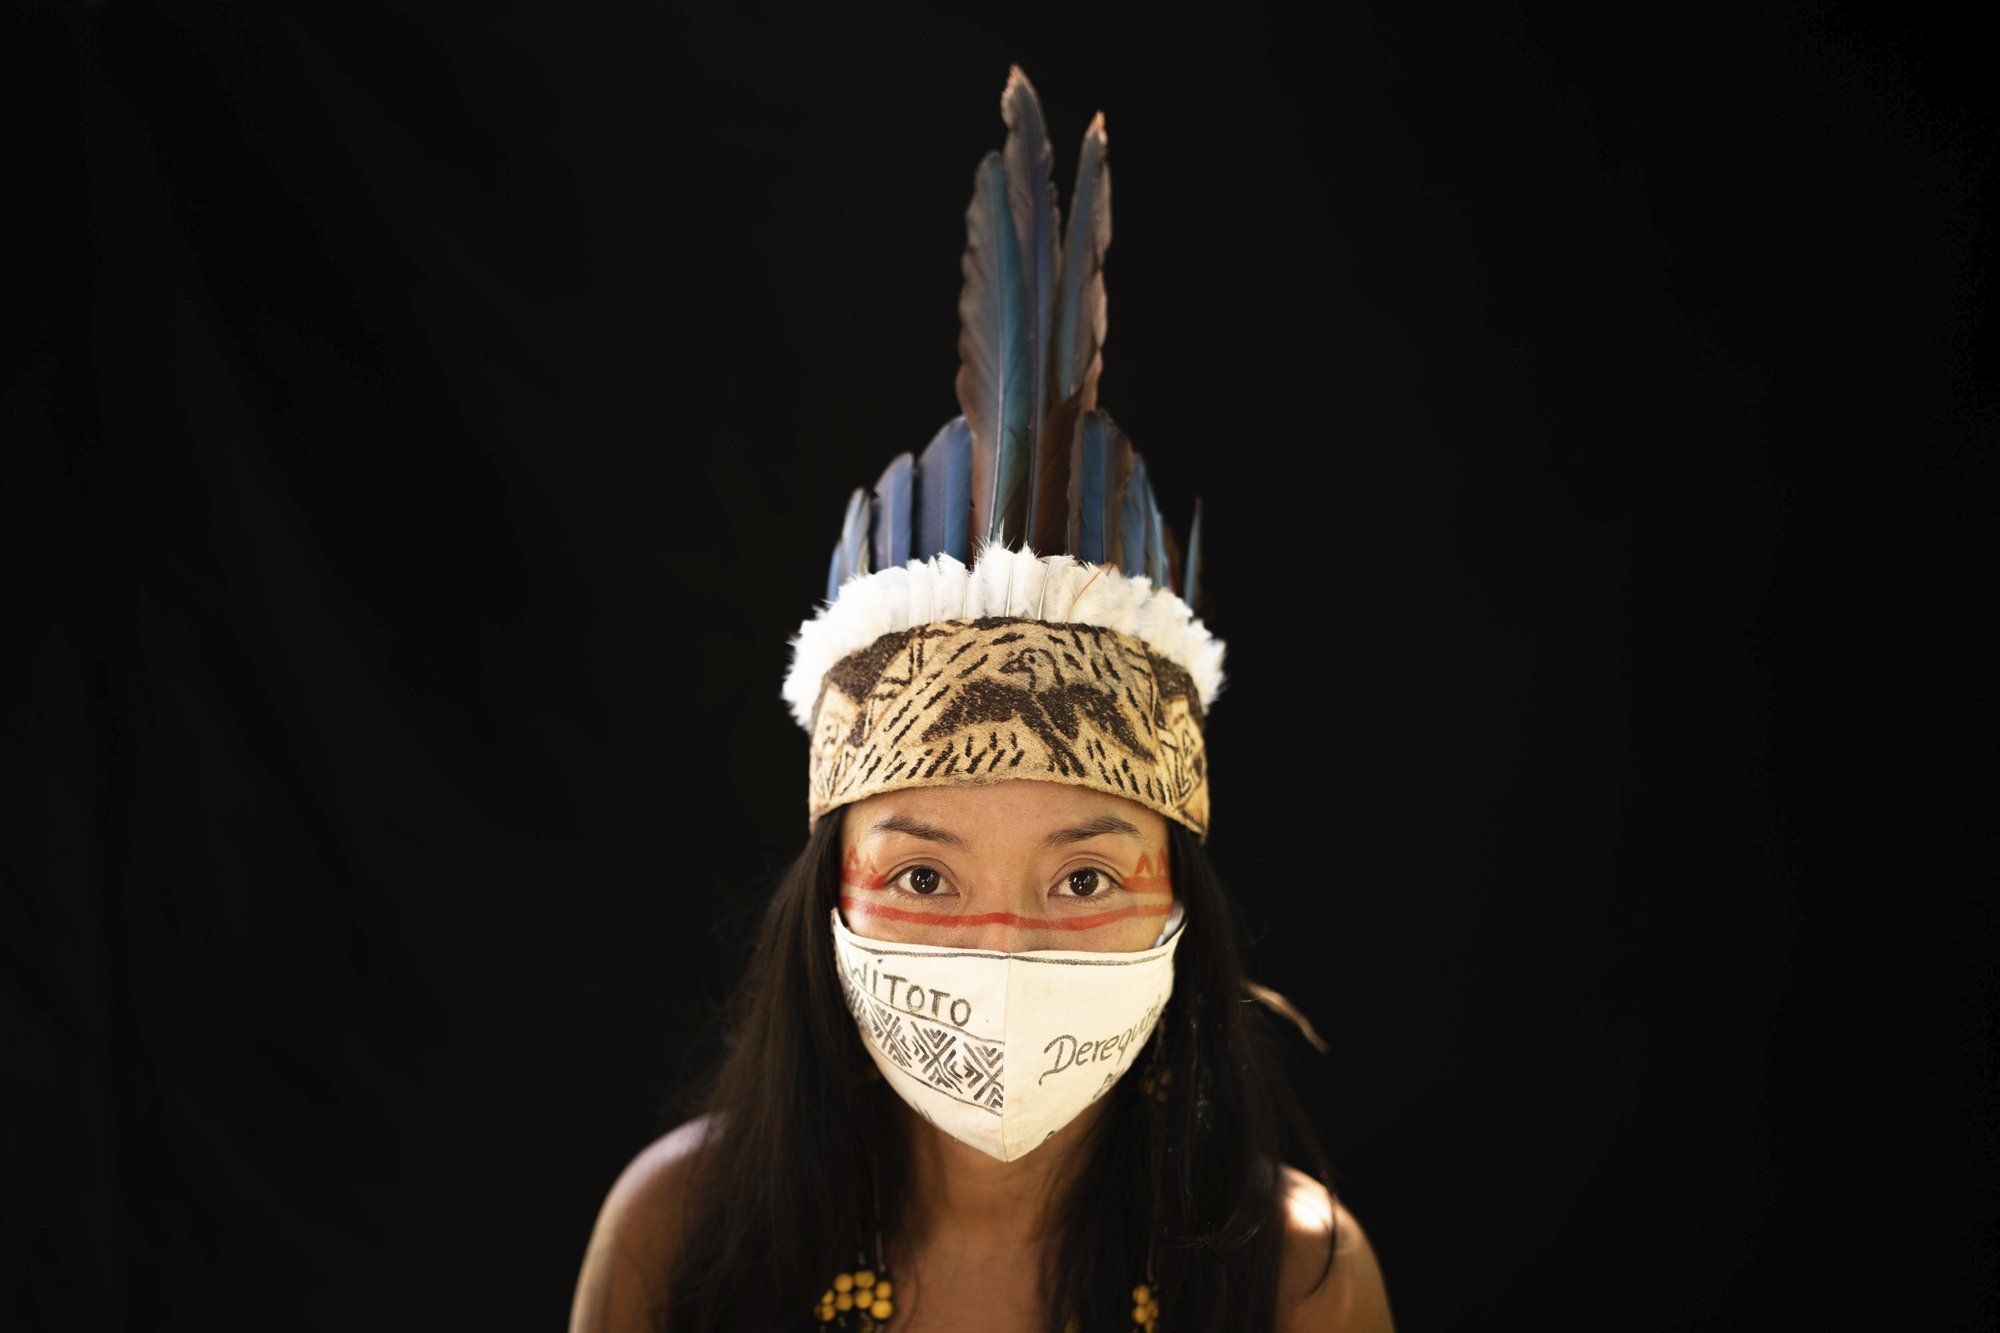 Vanda Ortega, 33, of the Witoto indigenous ethnic group, poses for a portrait wearing the traditional dress of her tribe and a face mask amid the spread of the new coronavirus in the Park of the Tribes community, Manaus, Brazil, Sunday, May 31, 2020. Ortega has become one of the symbols of the indigenous fight against the pandemic after raising her voice to denounce government neglect, including the undercounting of indigenous patients who were, instead, registered as multiracial in the public health system. Image by Felipe Dana / AP Photo. Brazil, 2020.